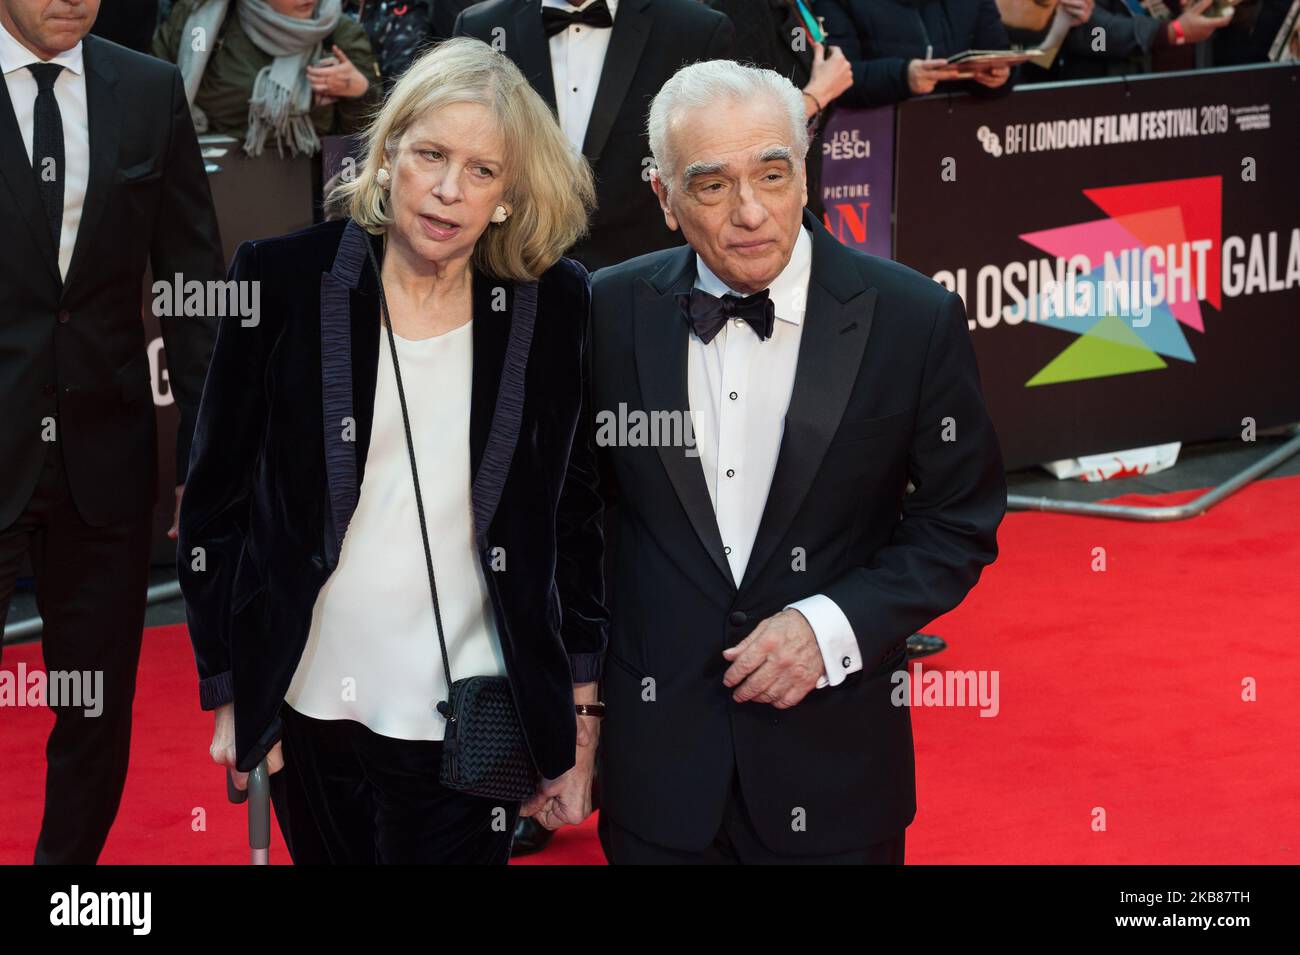 Martin Scorsese (R) and Helen Morris attend the international film premiere of 'The Irishman' at Odeon Luxe Leicester Square during the 63rd BFI London Film Festival Closing Night Gala on 13 October, 2019 in London, England. (Photo by WIktor Szymanowicz/NurPhoto) Stock Photo